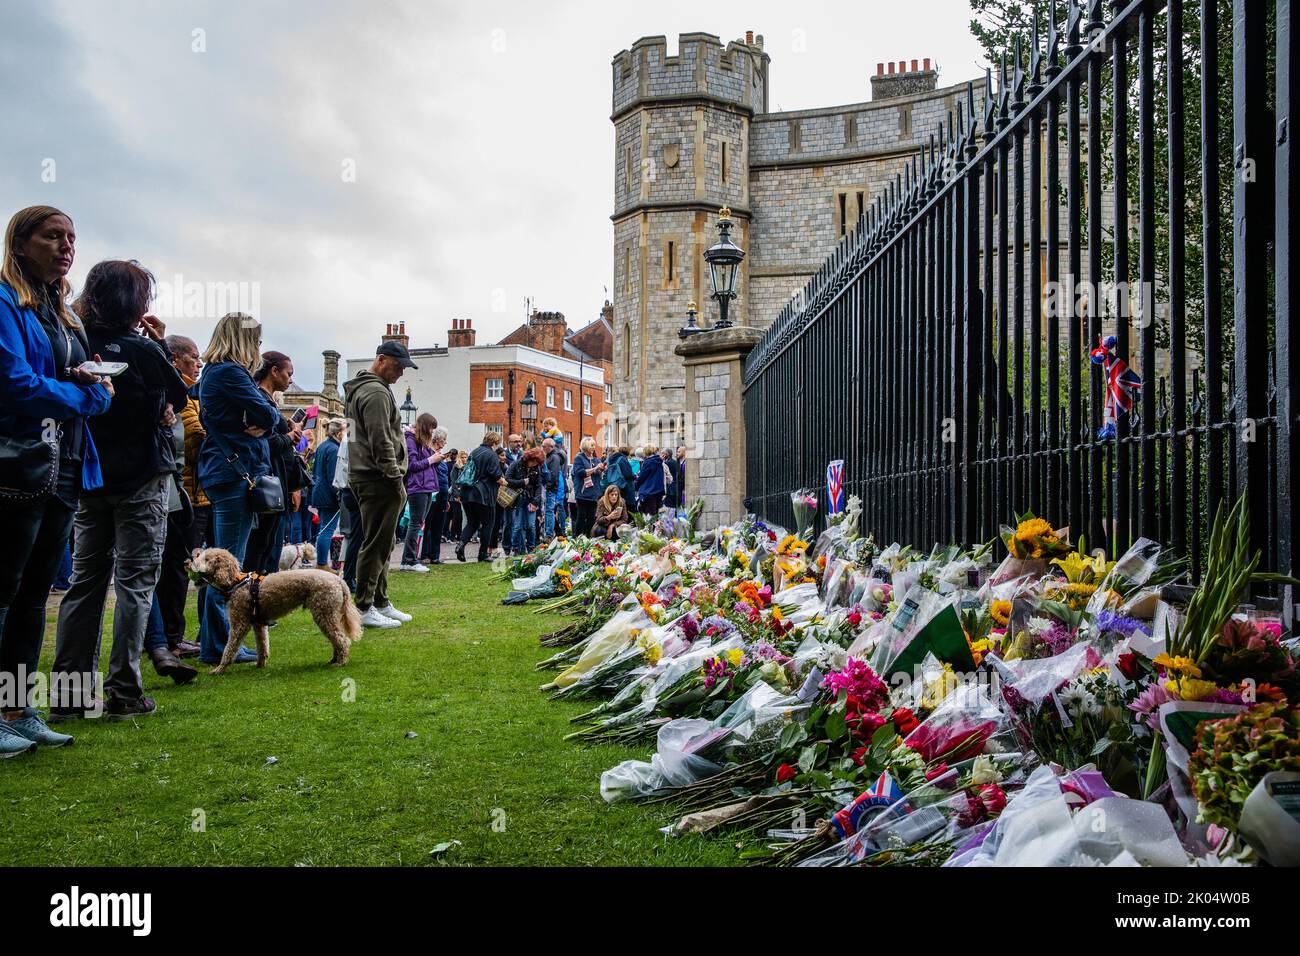 Windsor, UK. 9th September, 2022. Visitors look at floral tributes left outside Cambridge Gate at Windsor Castle a day after the death of Queen Elizabeth II. Queen Elizabeth II, the UK's longest-serving monarch, died at Balmoral aged 96 after a reign lasting 70 years. Credit: Mark Kerrison/Alamy Live News Stock Photo